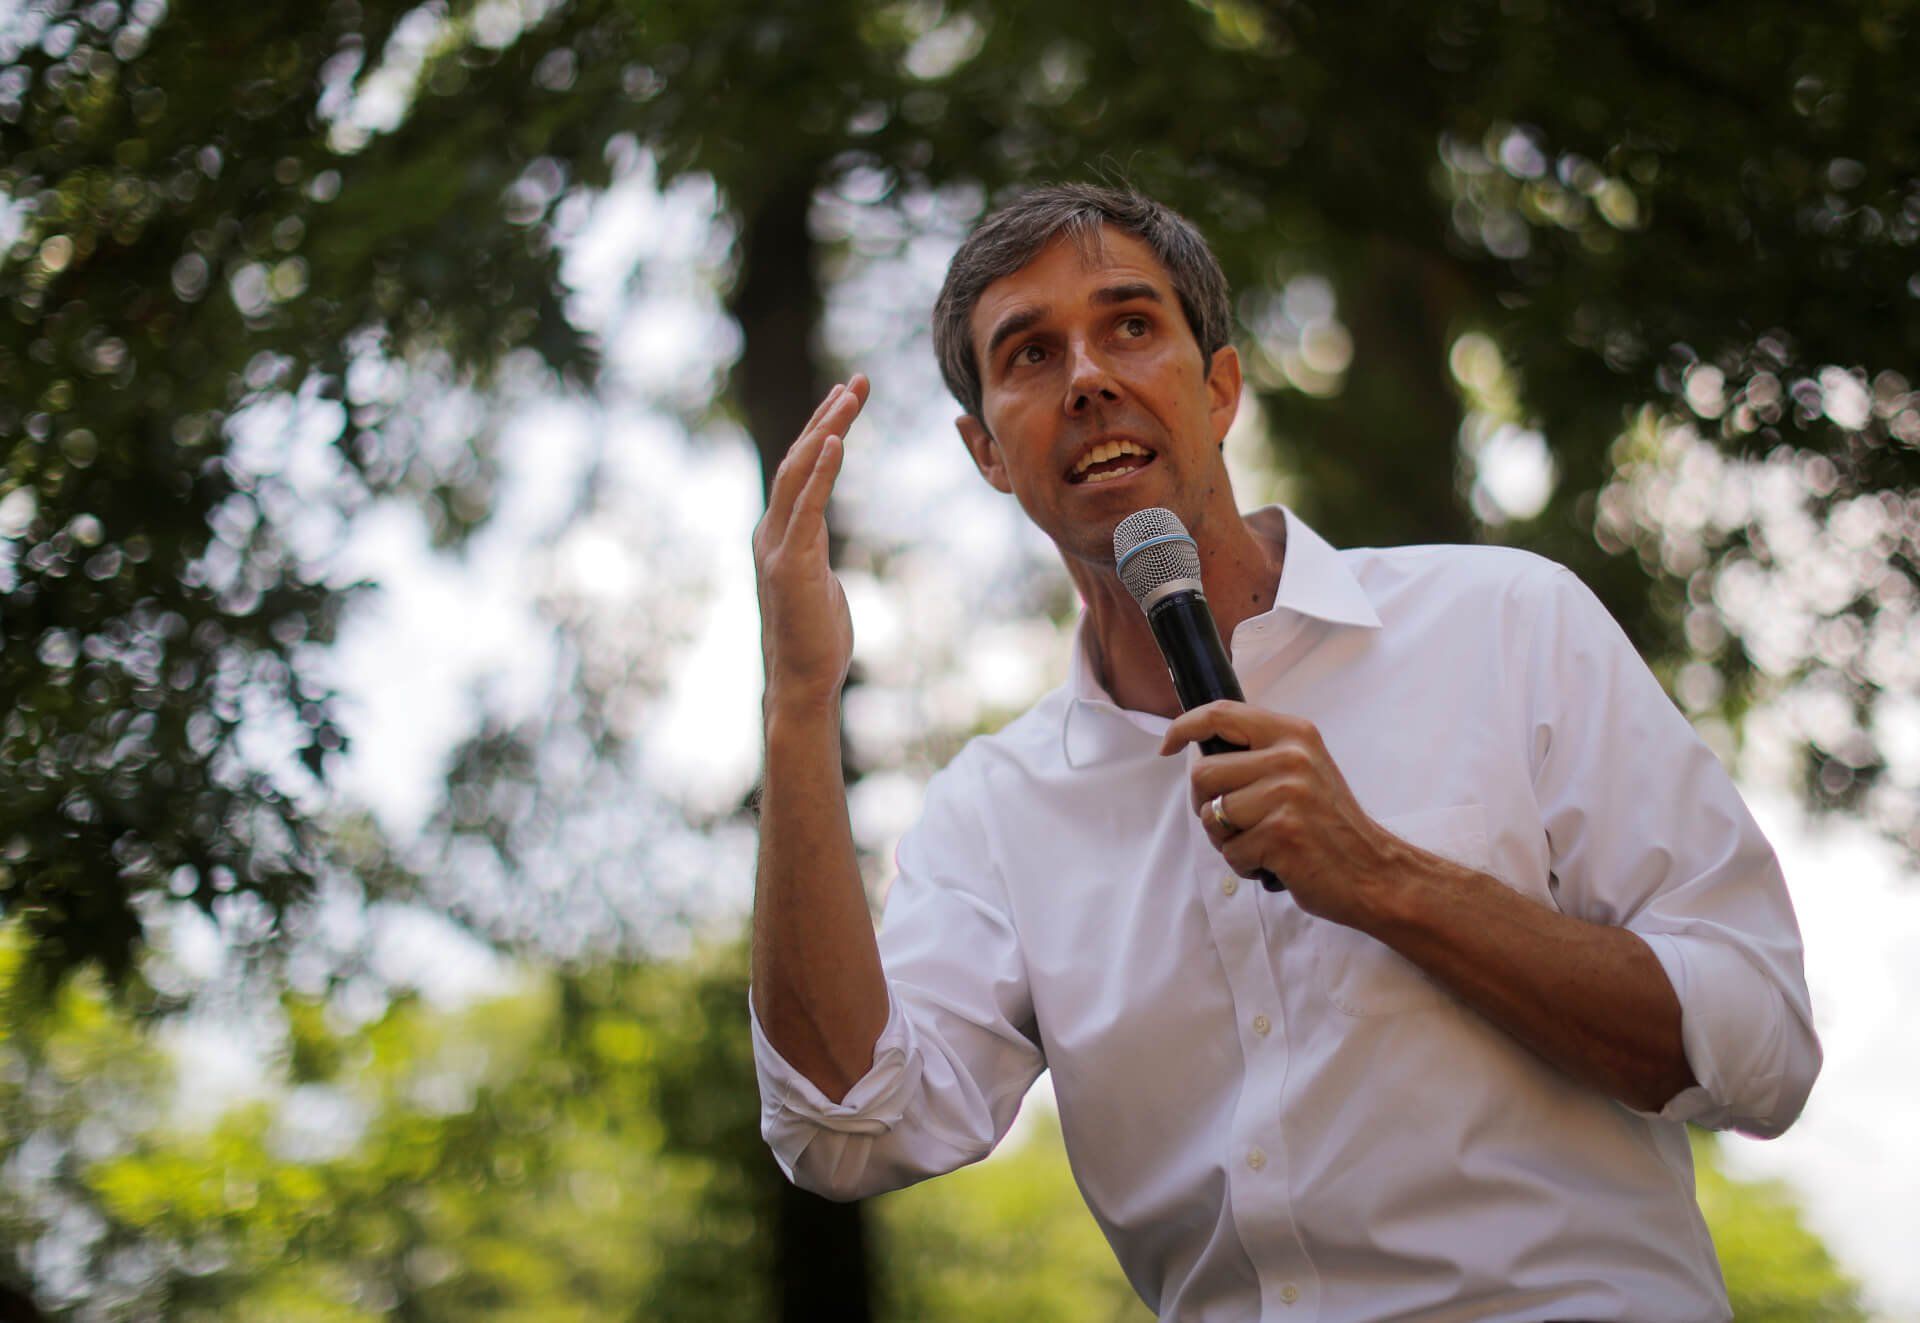 Democratic 2020 U.S. presidential candidate and former U.S. Representative Beto O'Rourke speaks during a campaign stop in Manchester, New Hampshire, July 13, 2019. 